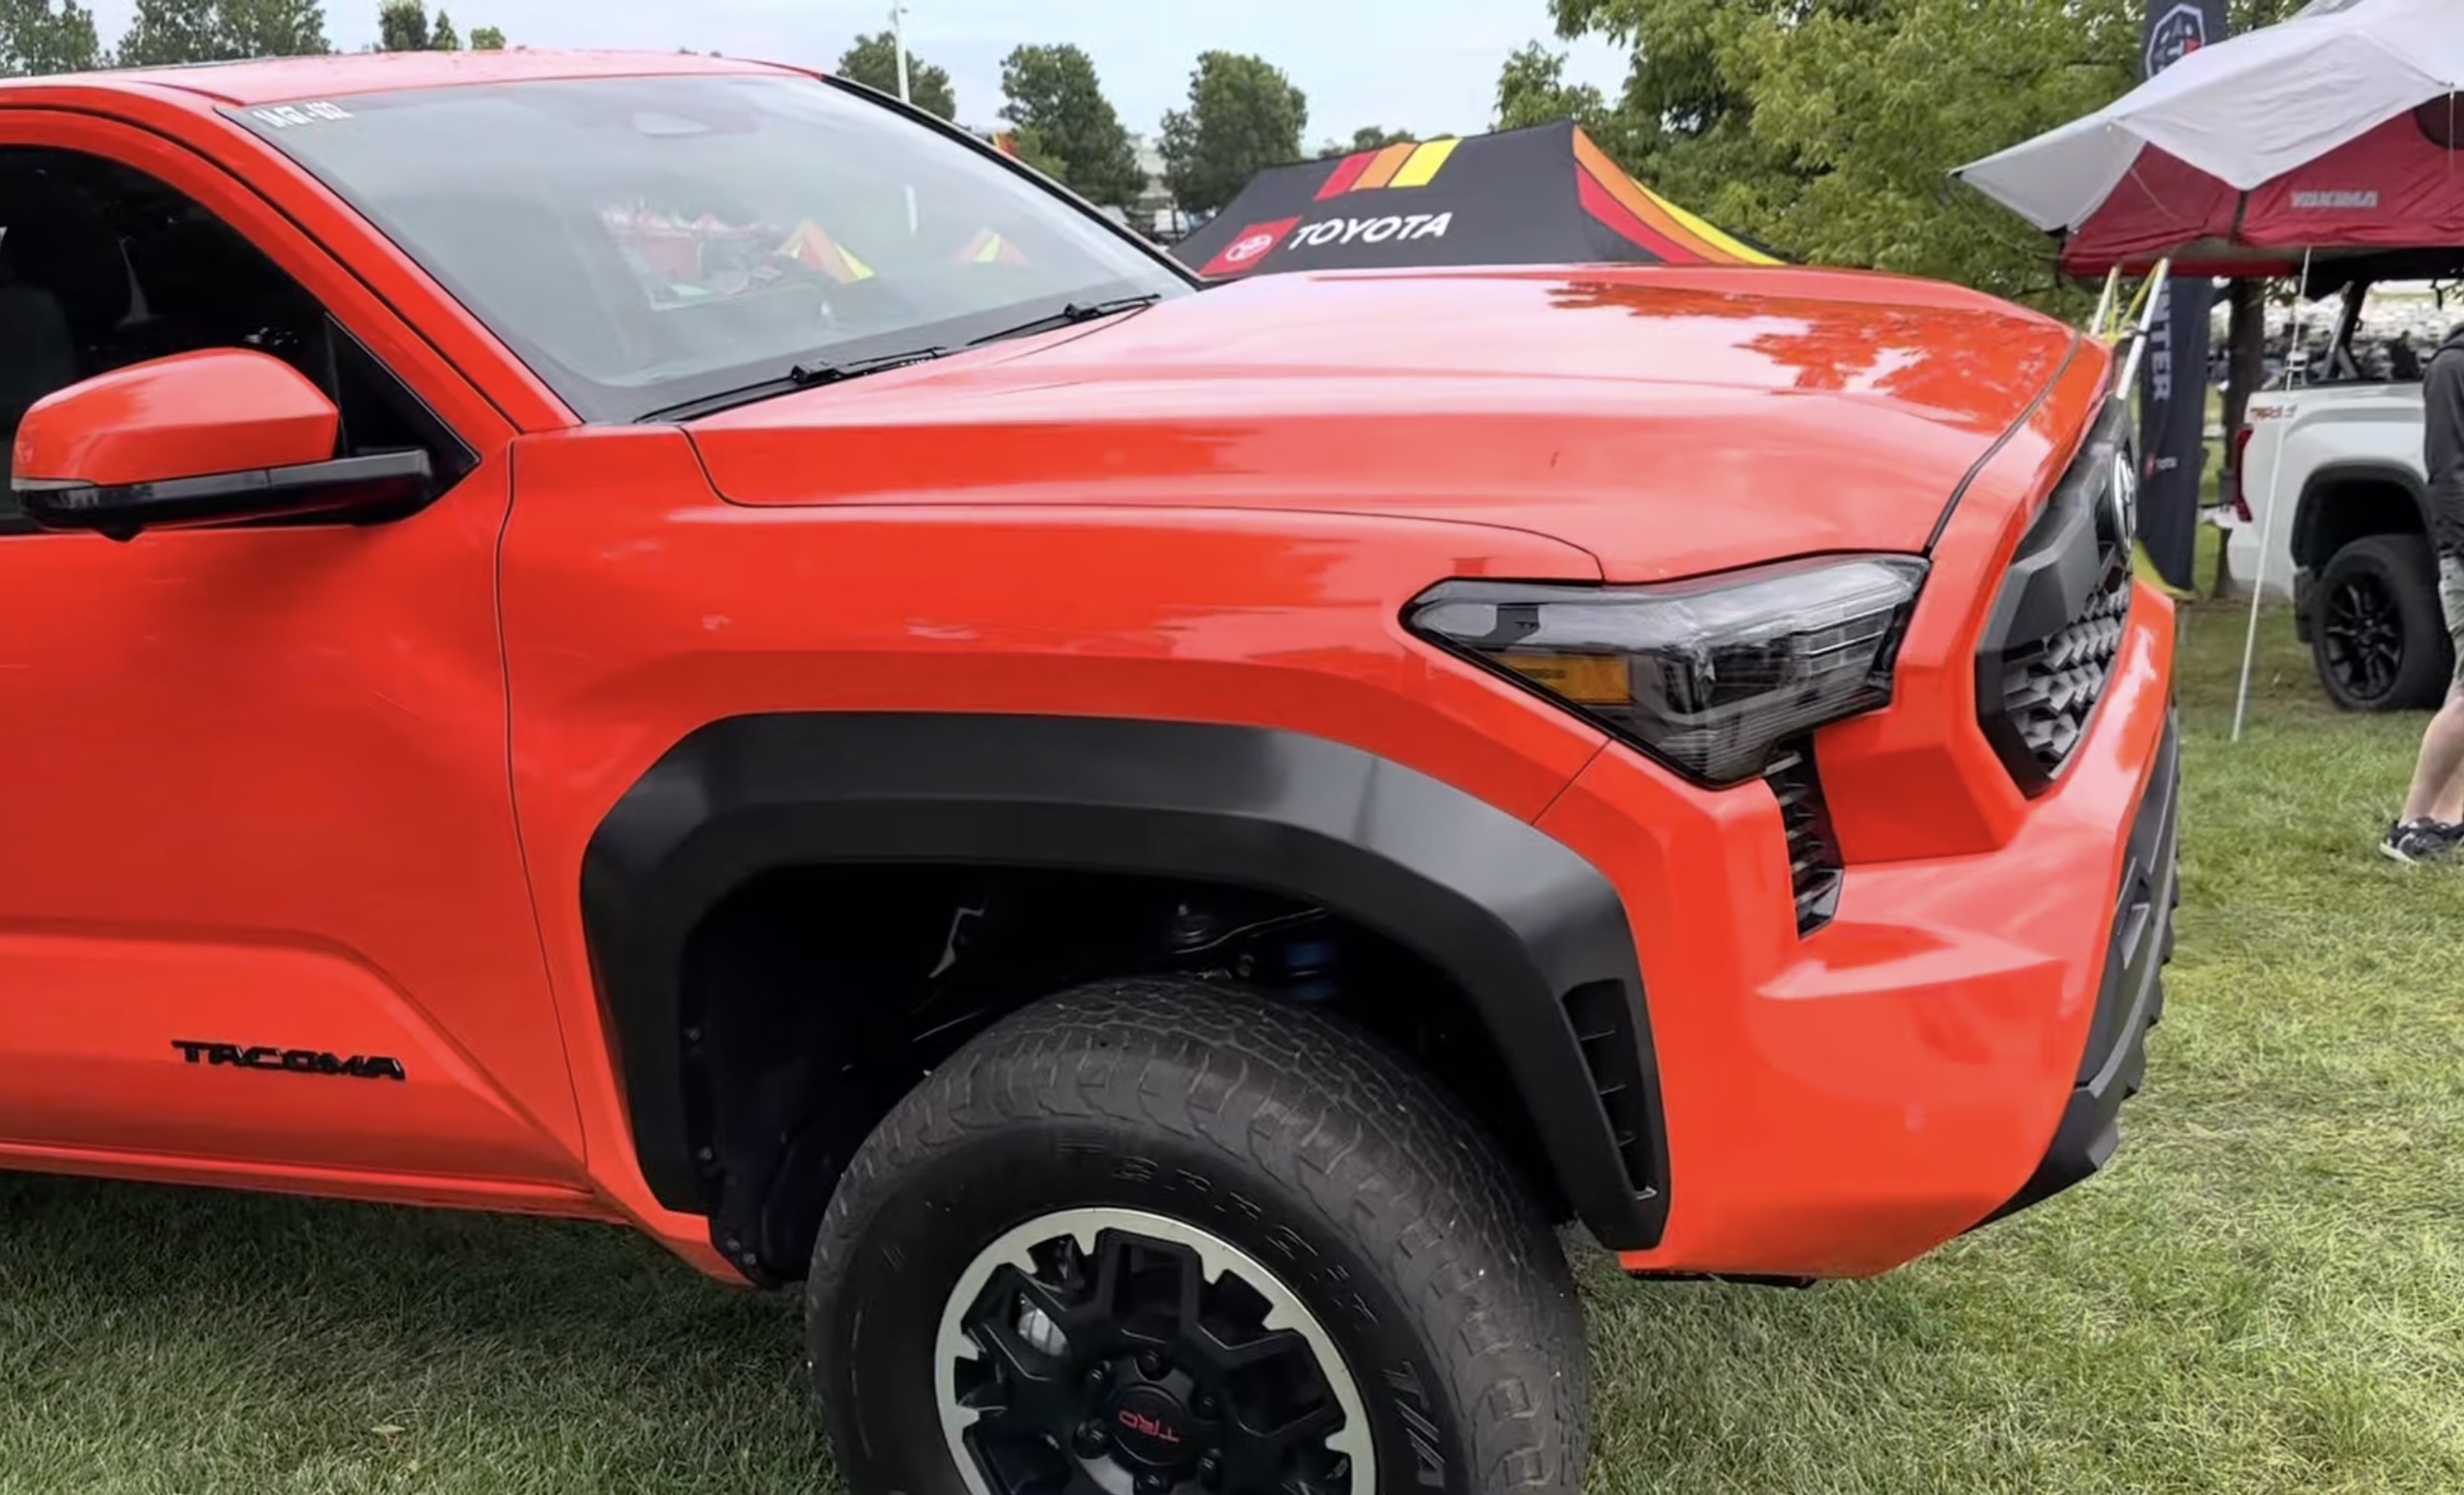 2024 Tacoma 2024 Tacoma TRD Off-Road has first official public reveal @ Overland Expo! [Videos + Photos] solar-octane-2024-tacoma-trd-off-road-5-